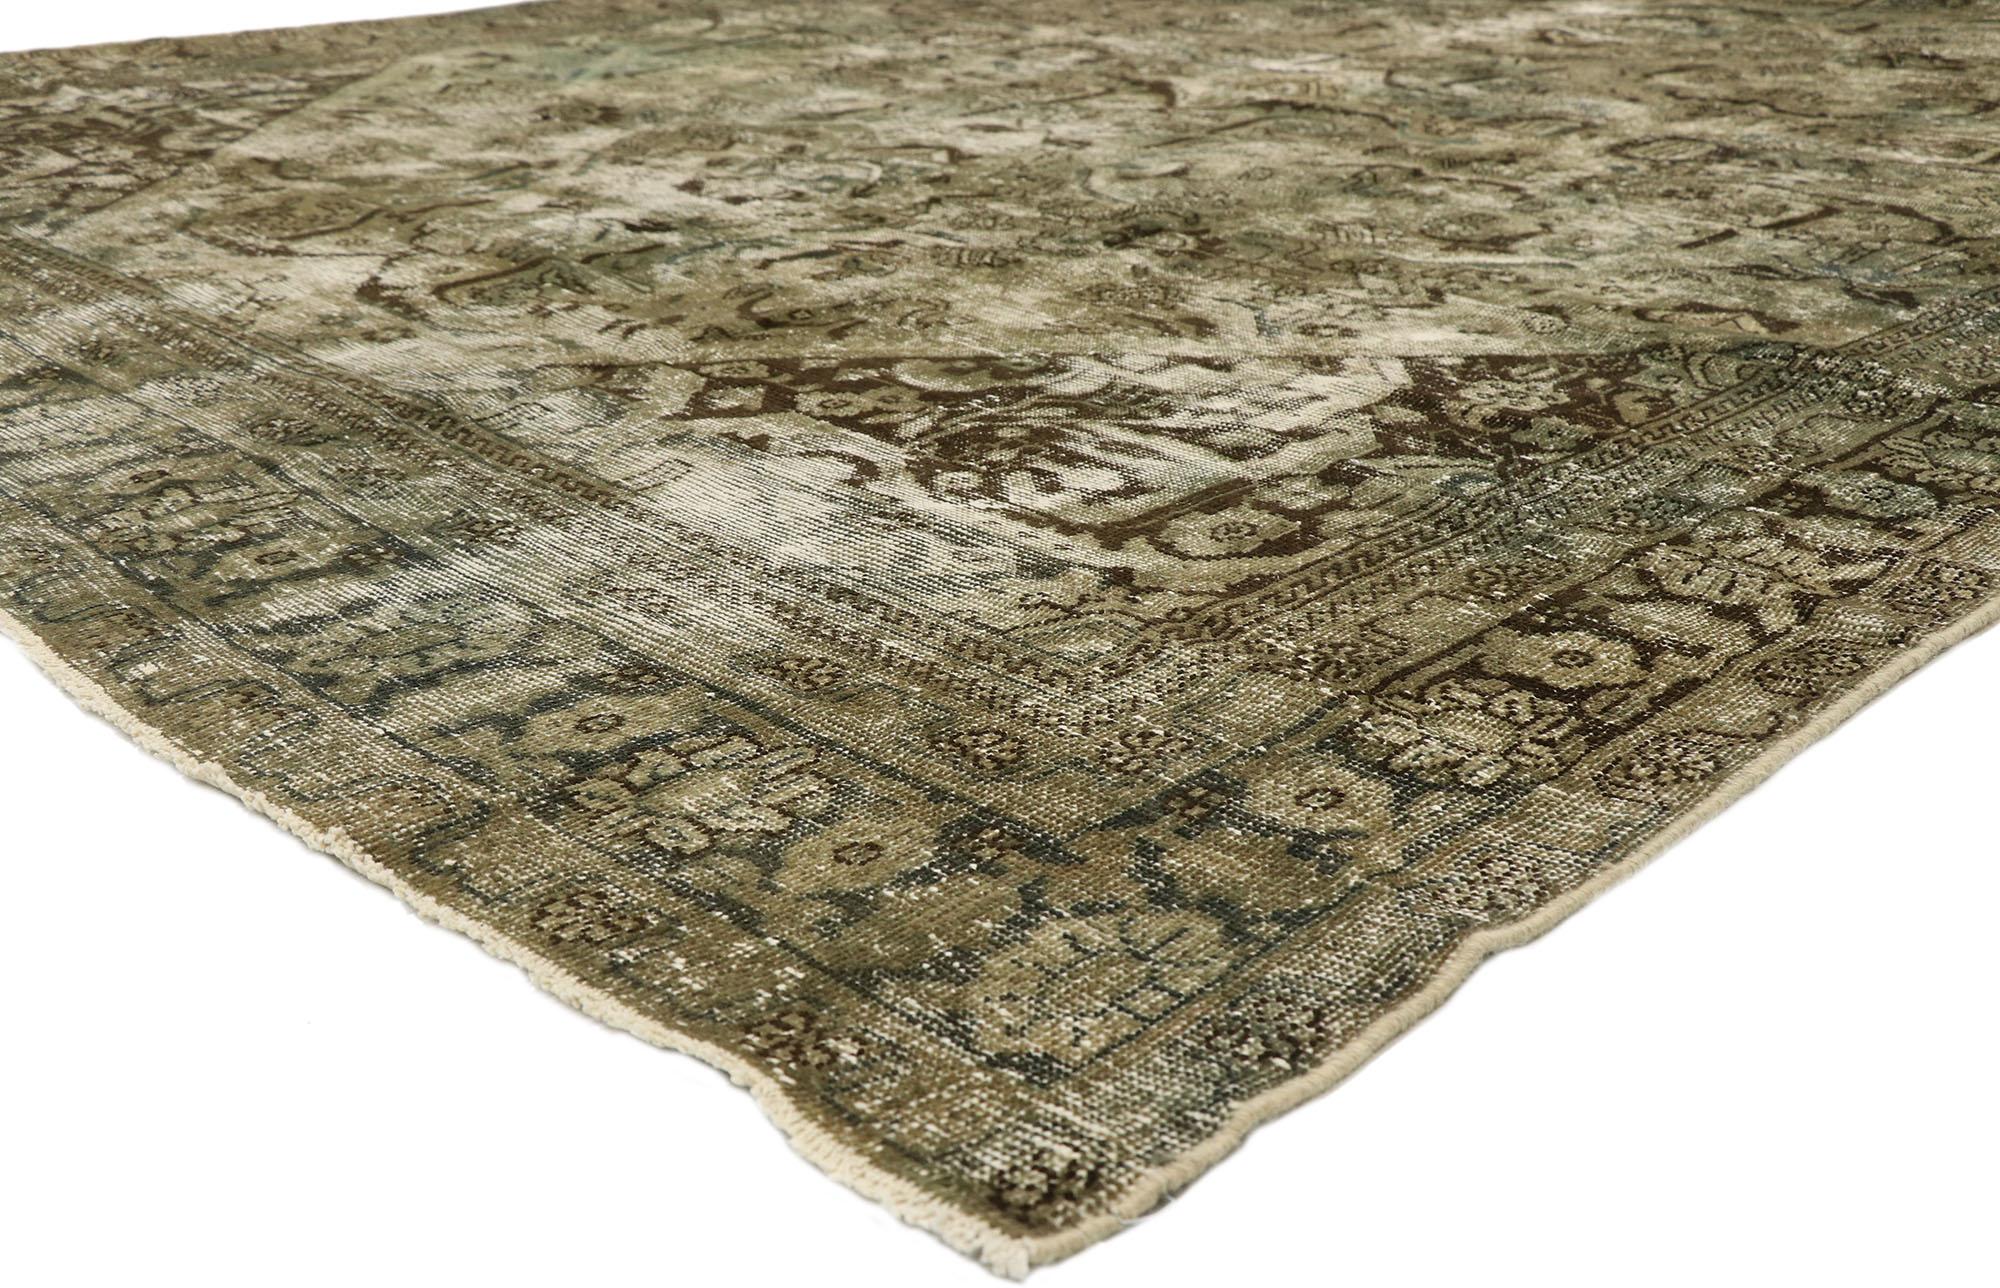 76823 Distressed Antique Persian Mahal Rug with Modern Rustic Style 09'00 x 12'02. With its perfectly worn-in charm and rustic sensibility, this hand-knotted wool distressed antique Persian Mahal rug will take on a curated lived-in look that feels